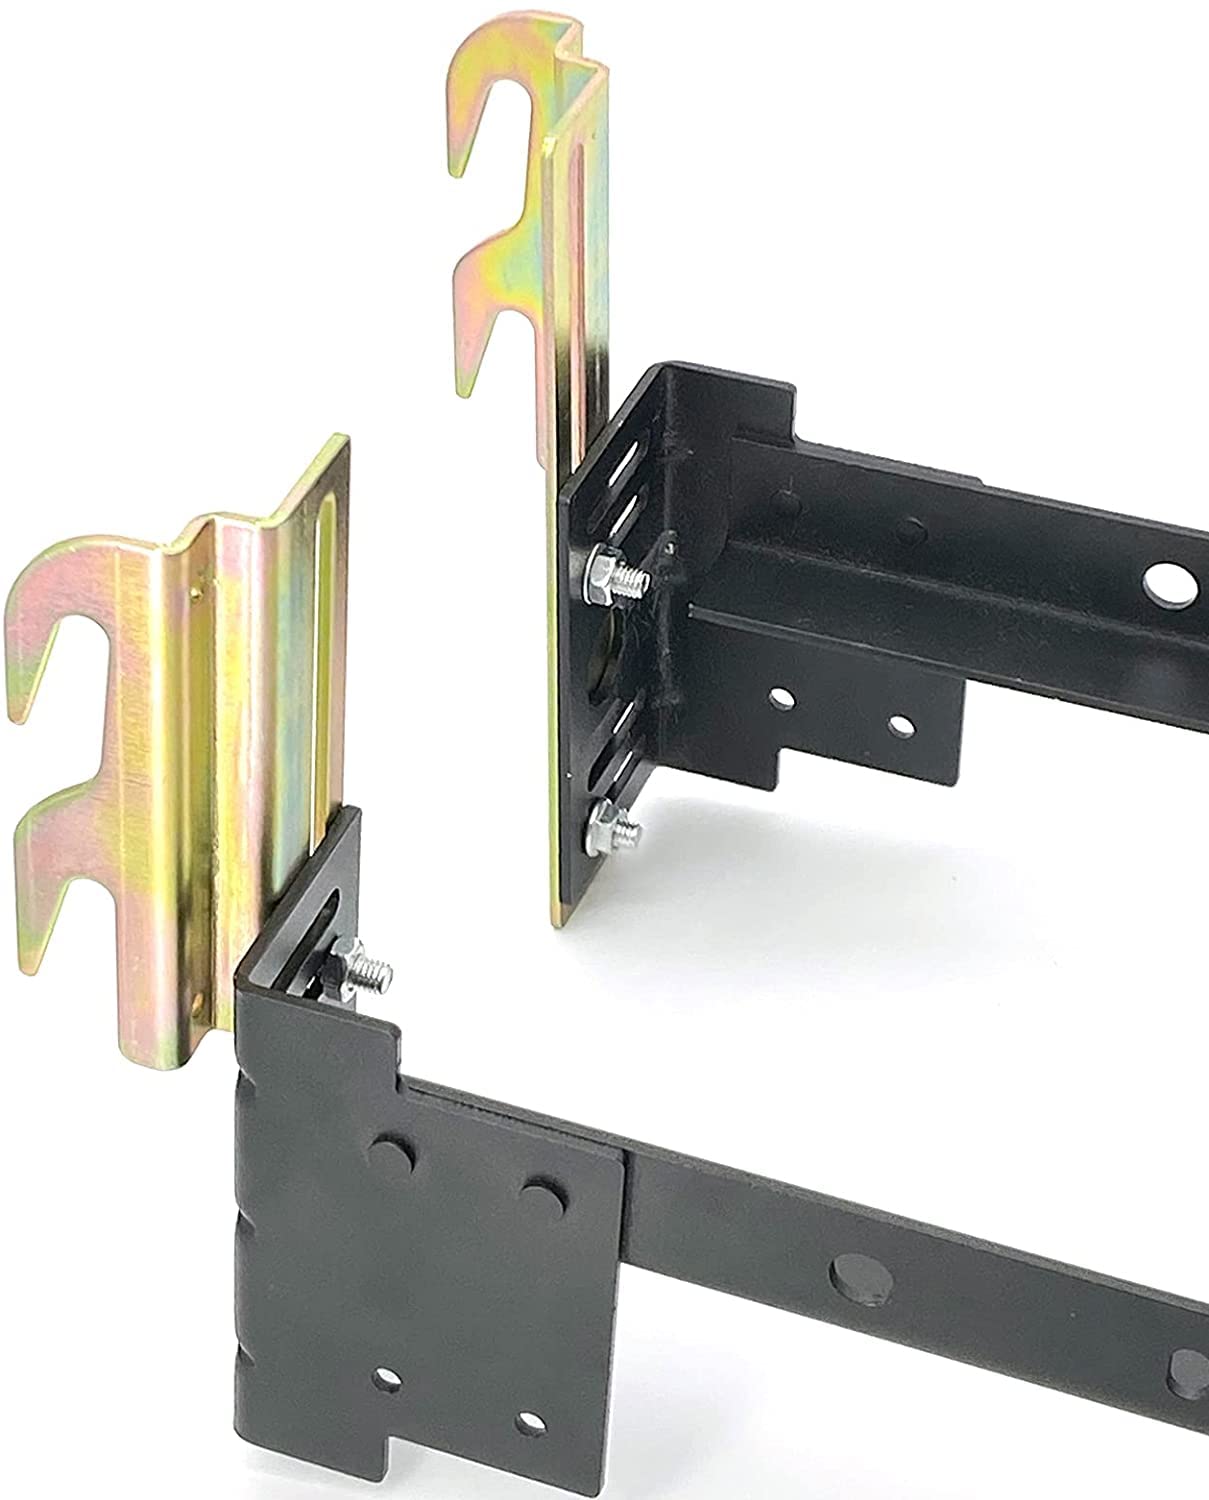 POROHOM 2Pcs #711 Bolt-On to Hook-On Bed Frame Conversion Brackets with Hardware Hook Plate,Headboard Hook Set, Hook on Bed Rails, Hook on Bed Frame Brackets